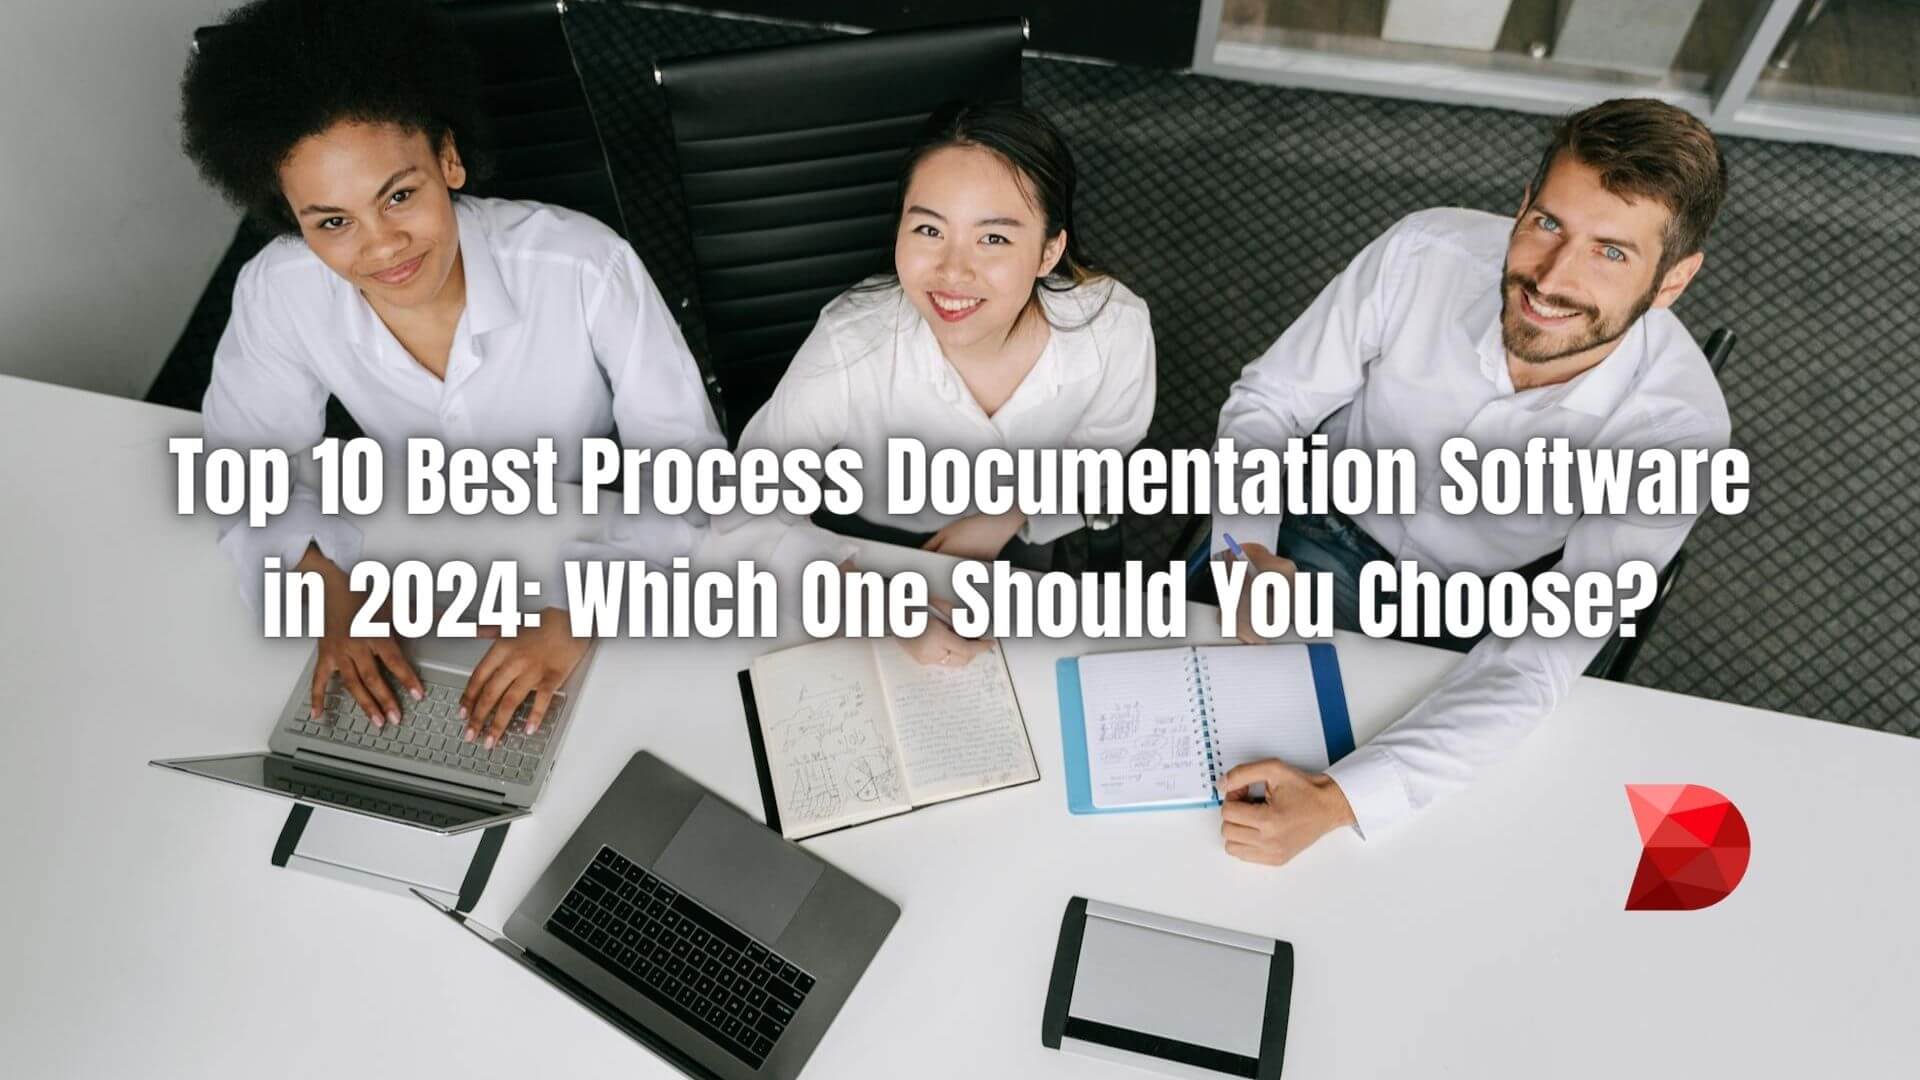 Uncover the best process documentation software for 2024! Explore our guide to make an informed choice among the top 10 options available.